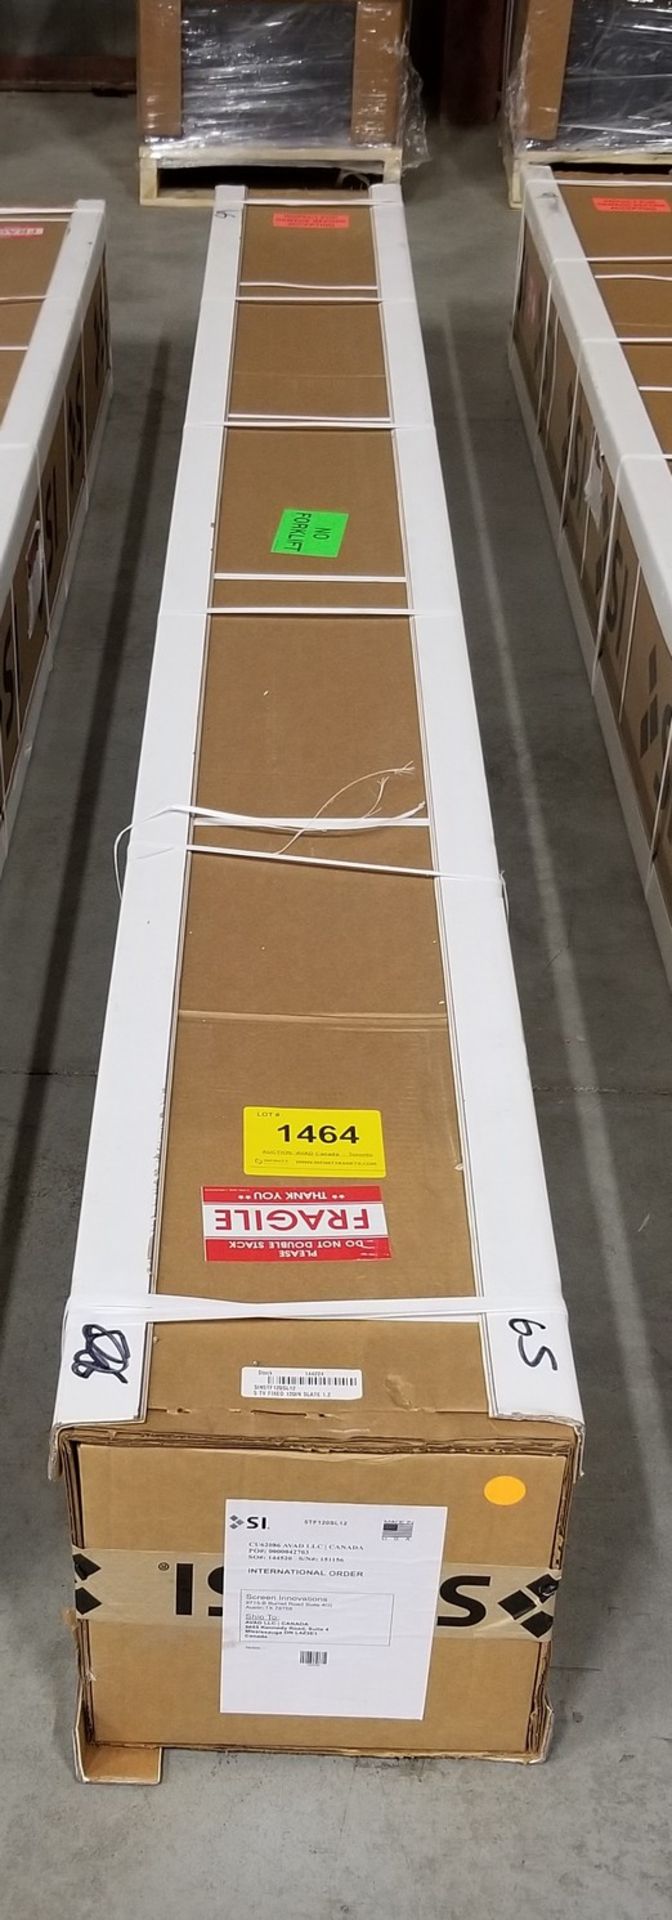 SCREEN INNOVATIONS, 5TF120SL12 TV FIXED SCREEN 120IN - (BNIB) MSRP $2785 - Image 2 of 3